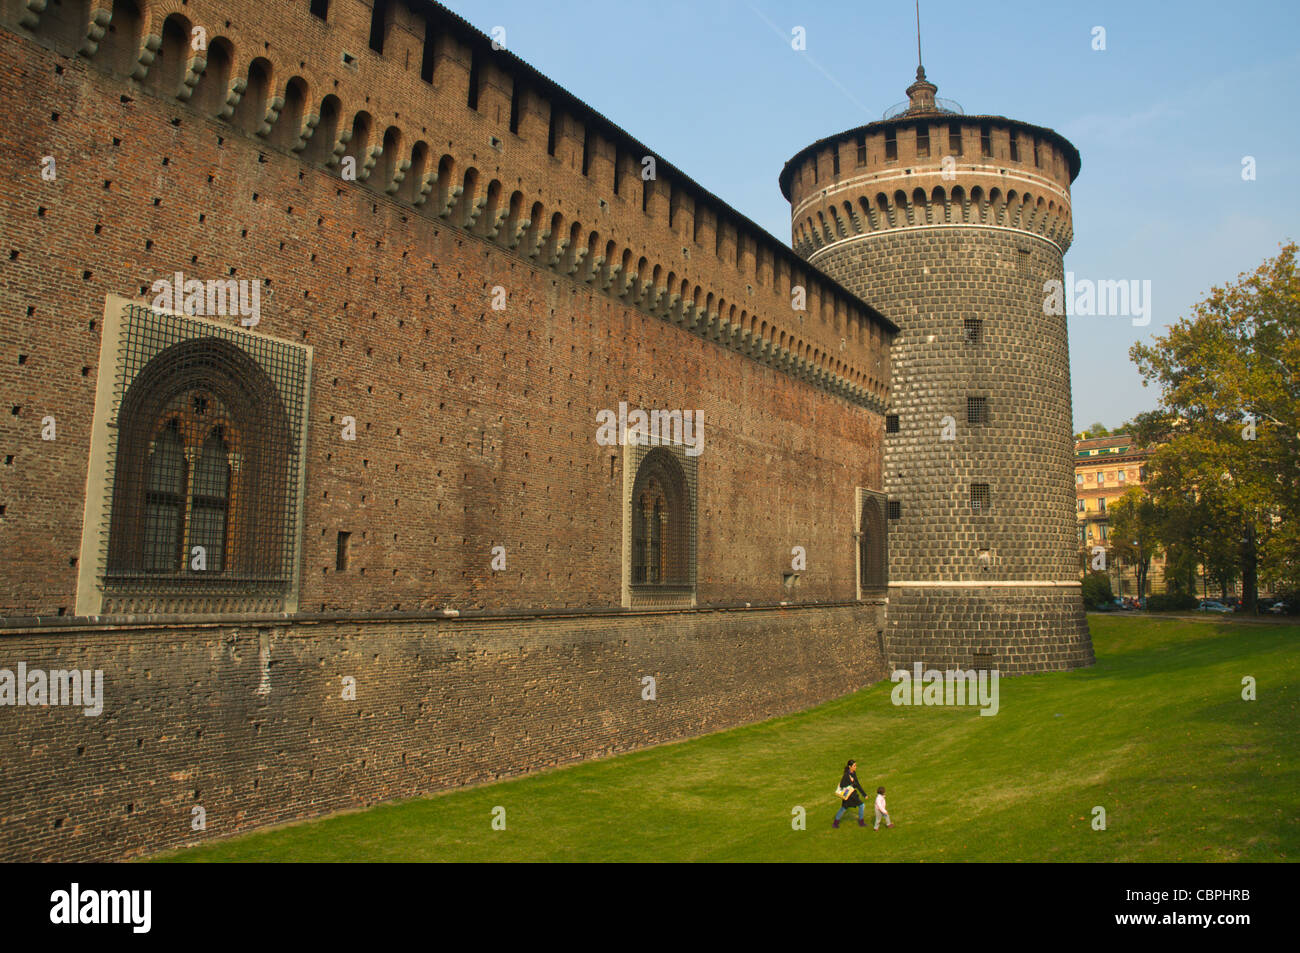 Moats dried by Napoleon in early 18th century encircling the walls of Castello Sforzesco castle Milan Italy Stock Photo